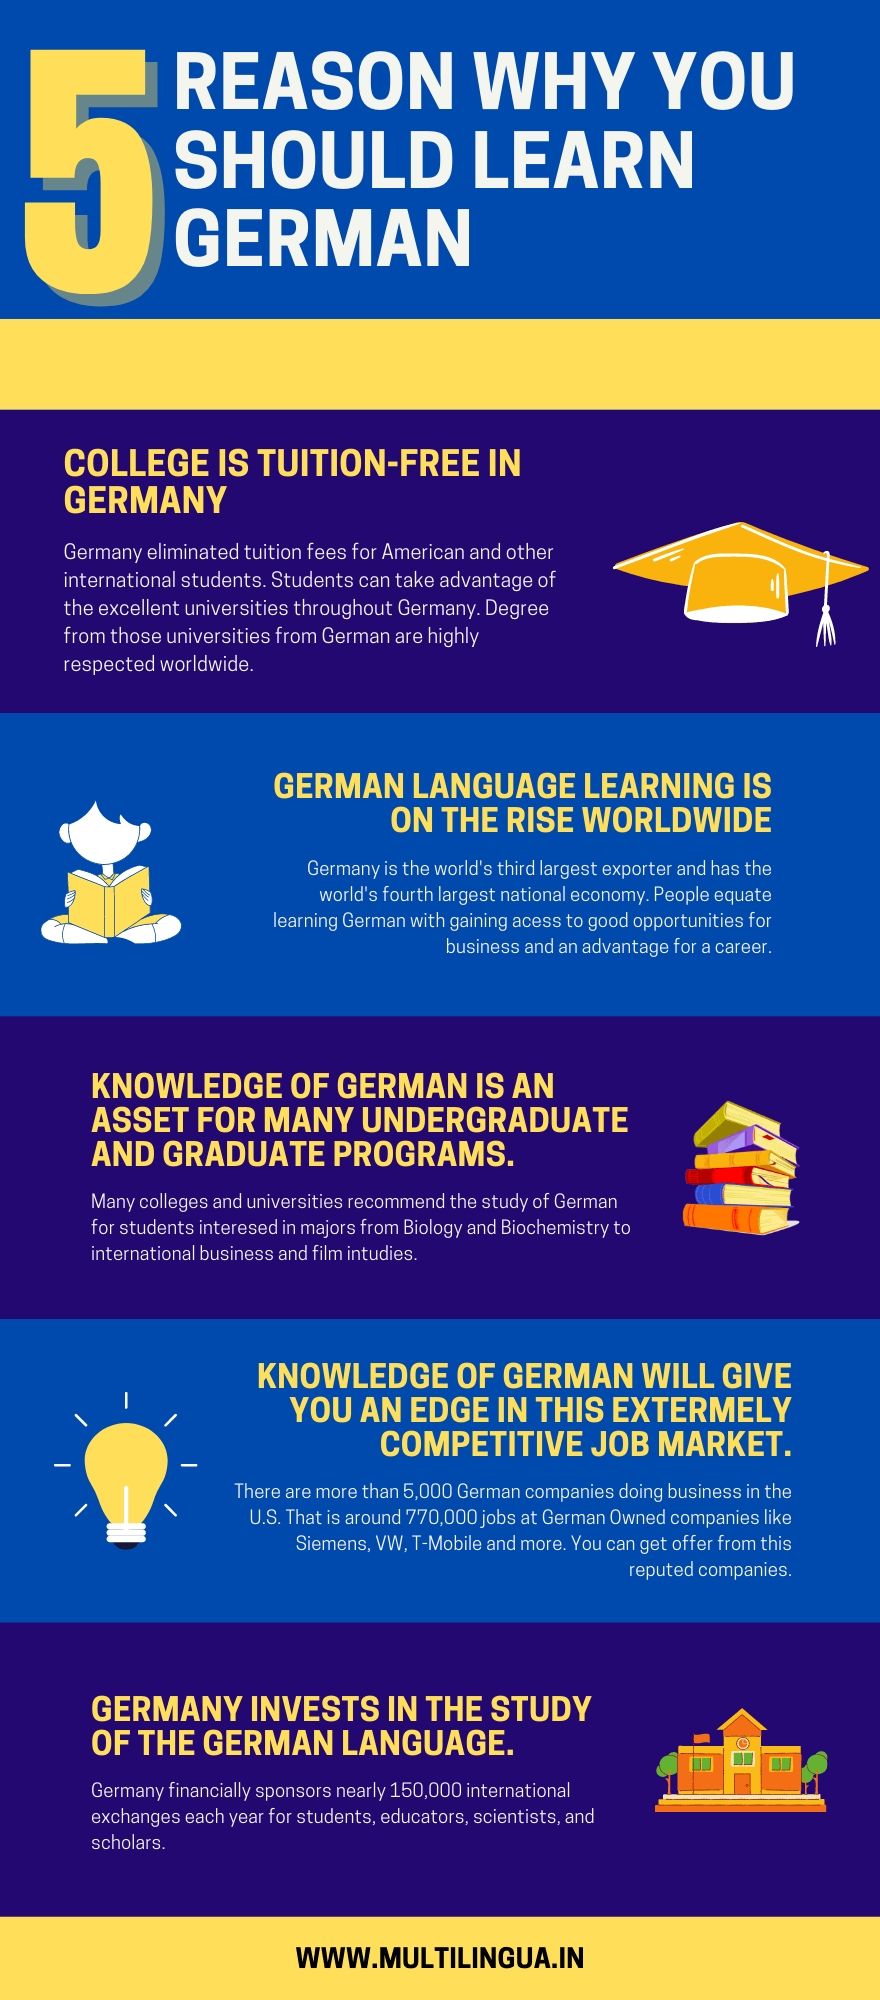 5 Reason Why You Should Learn German